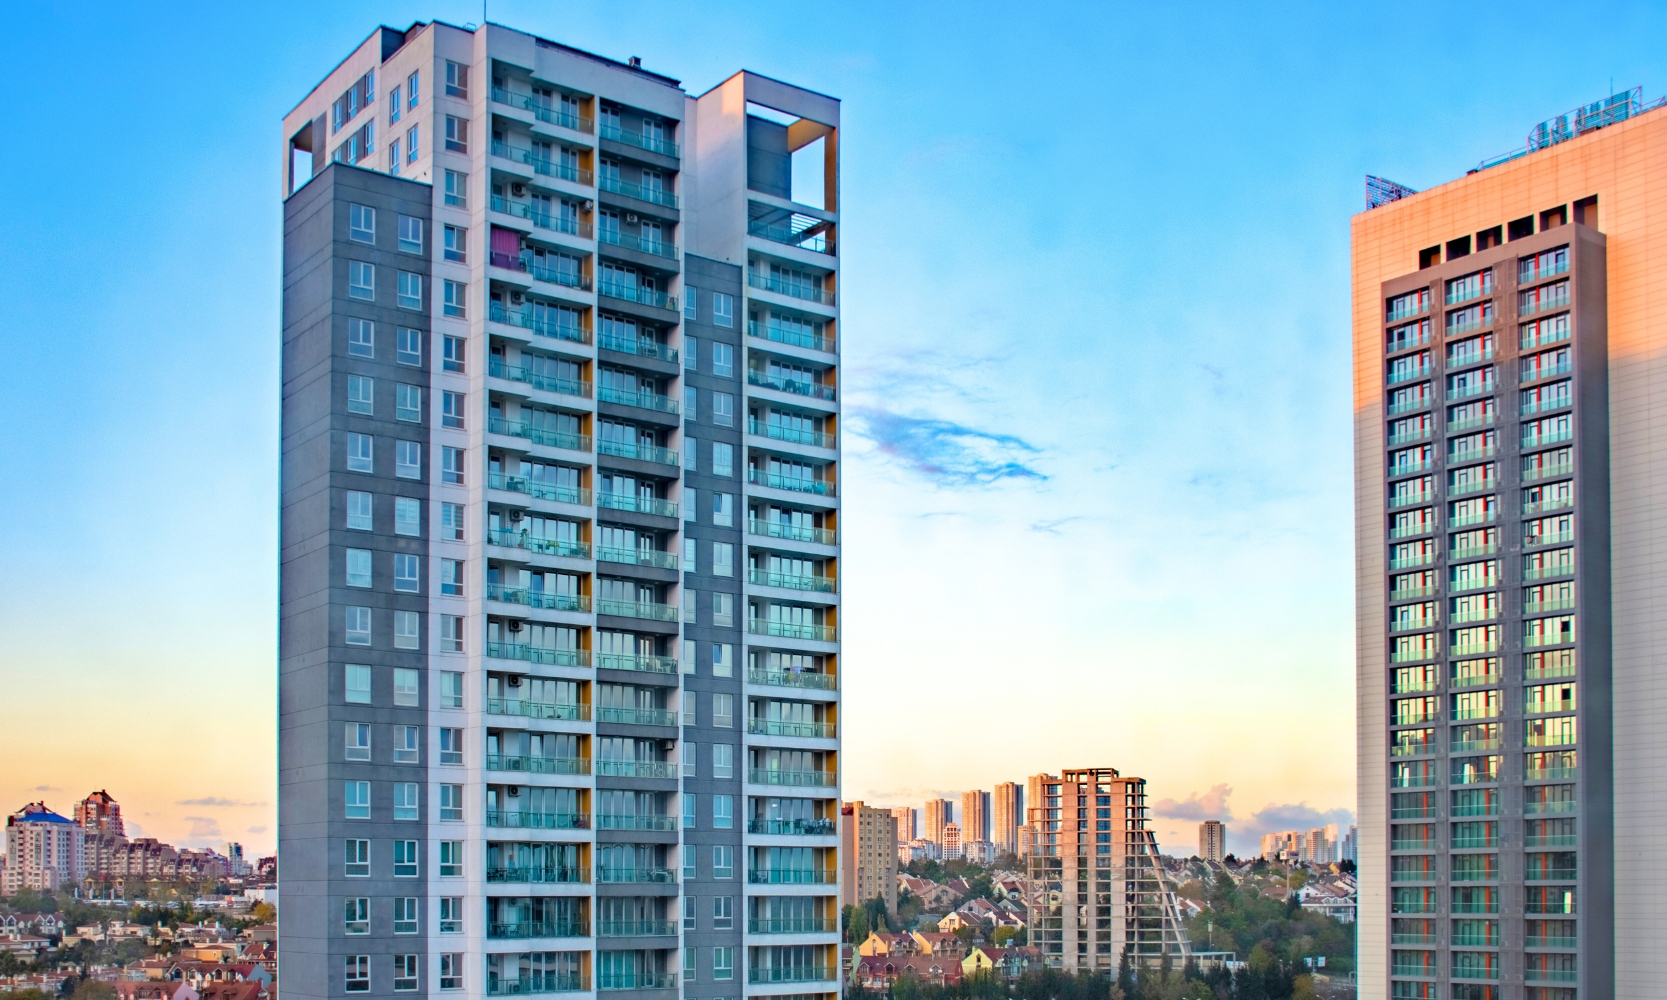 A photo of high-rise apartment and condo buildings in a city